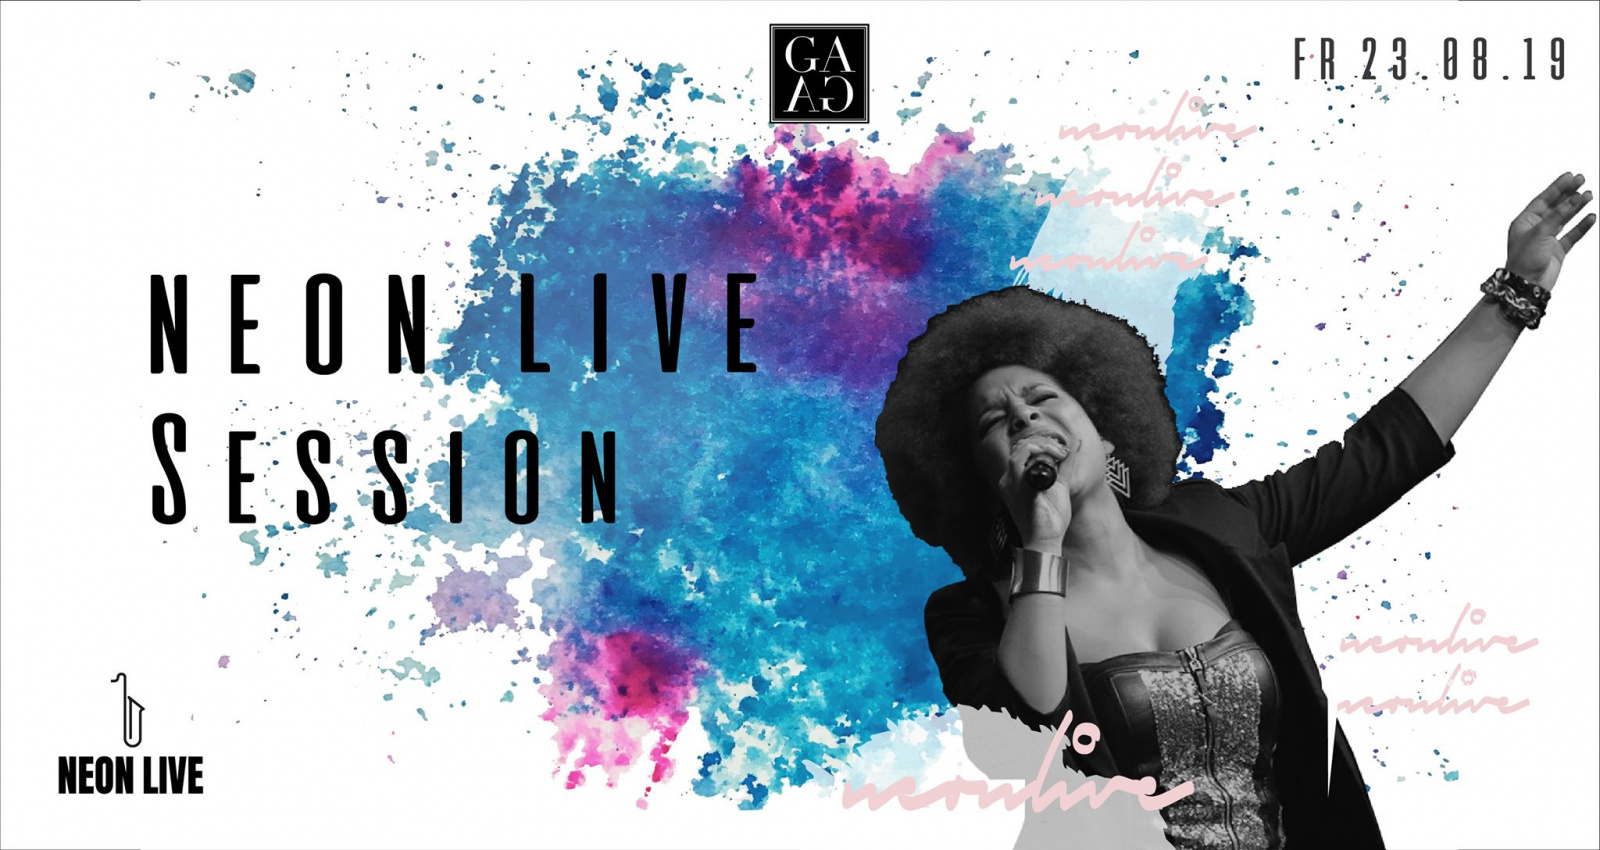 L!VE - die Session by NEON LIVE & GAGA